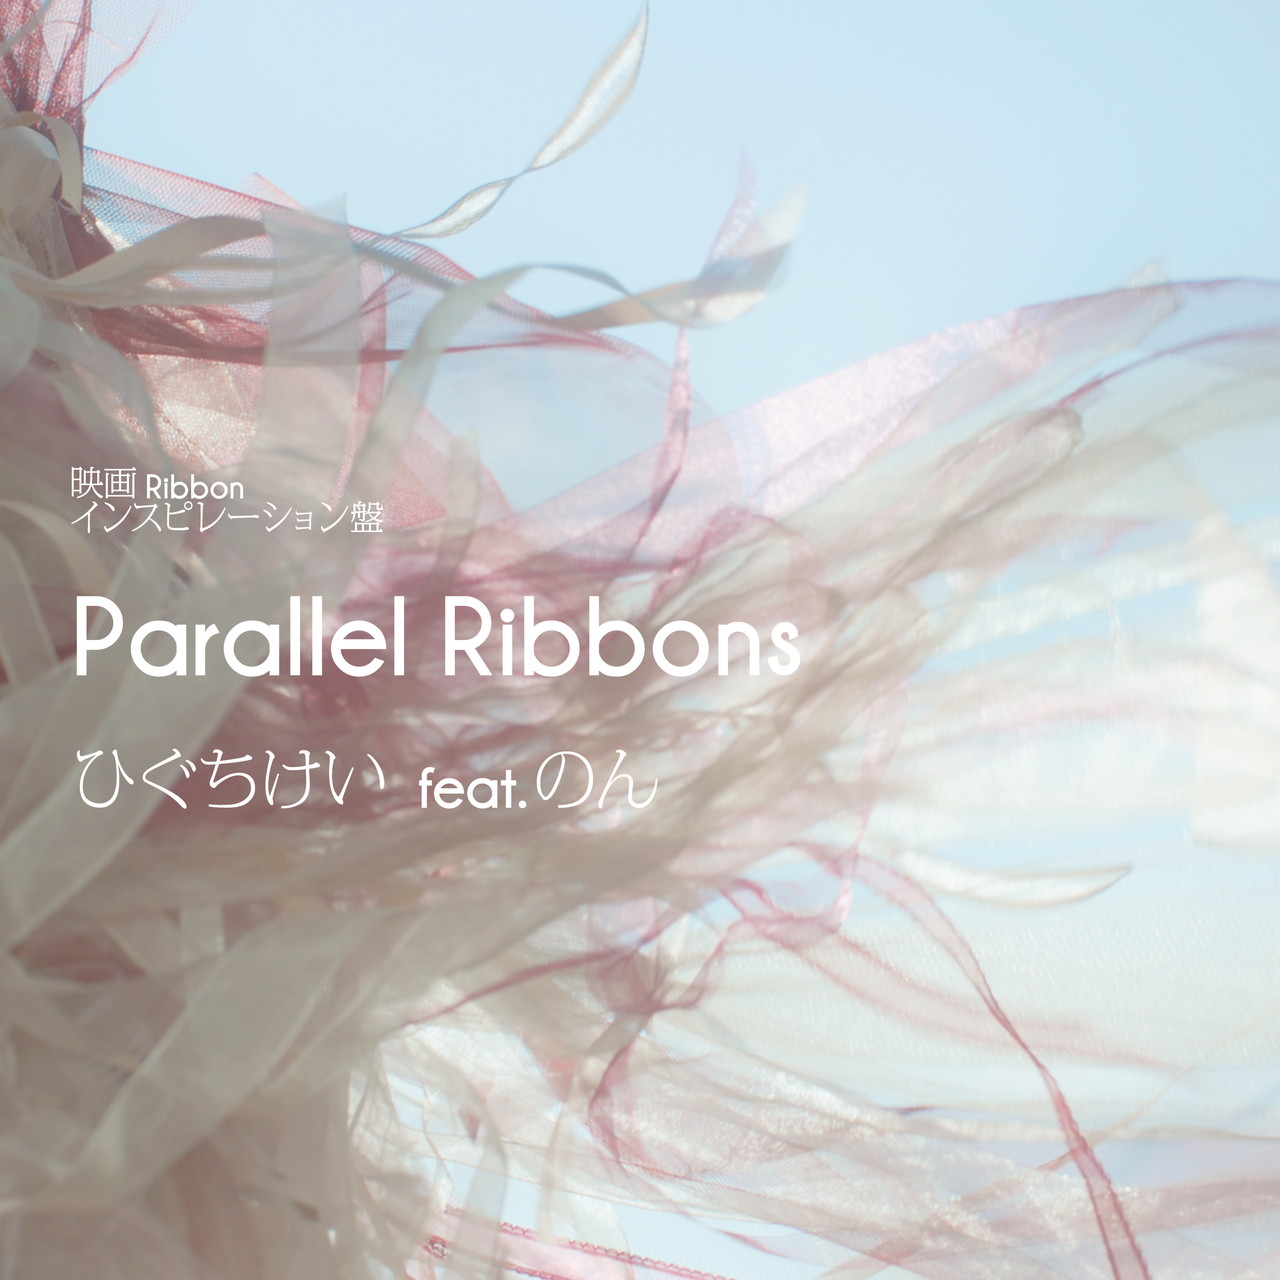 Parallel Ribbons